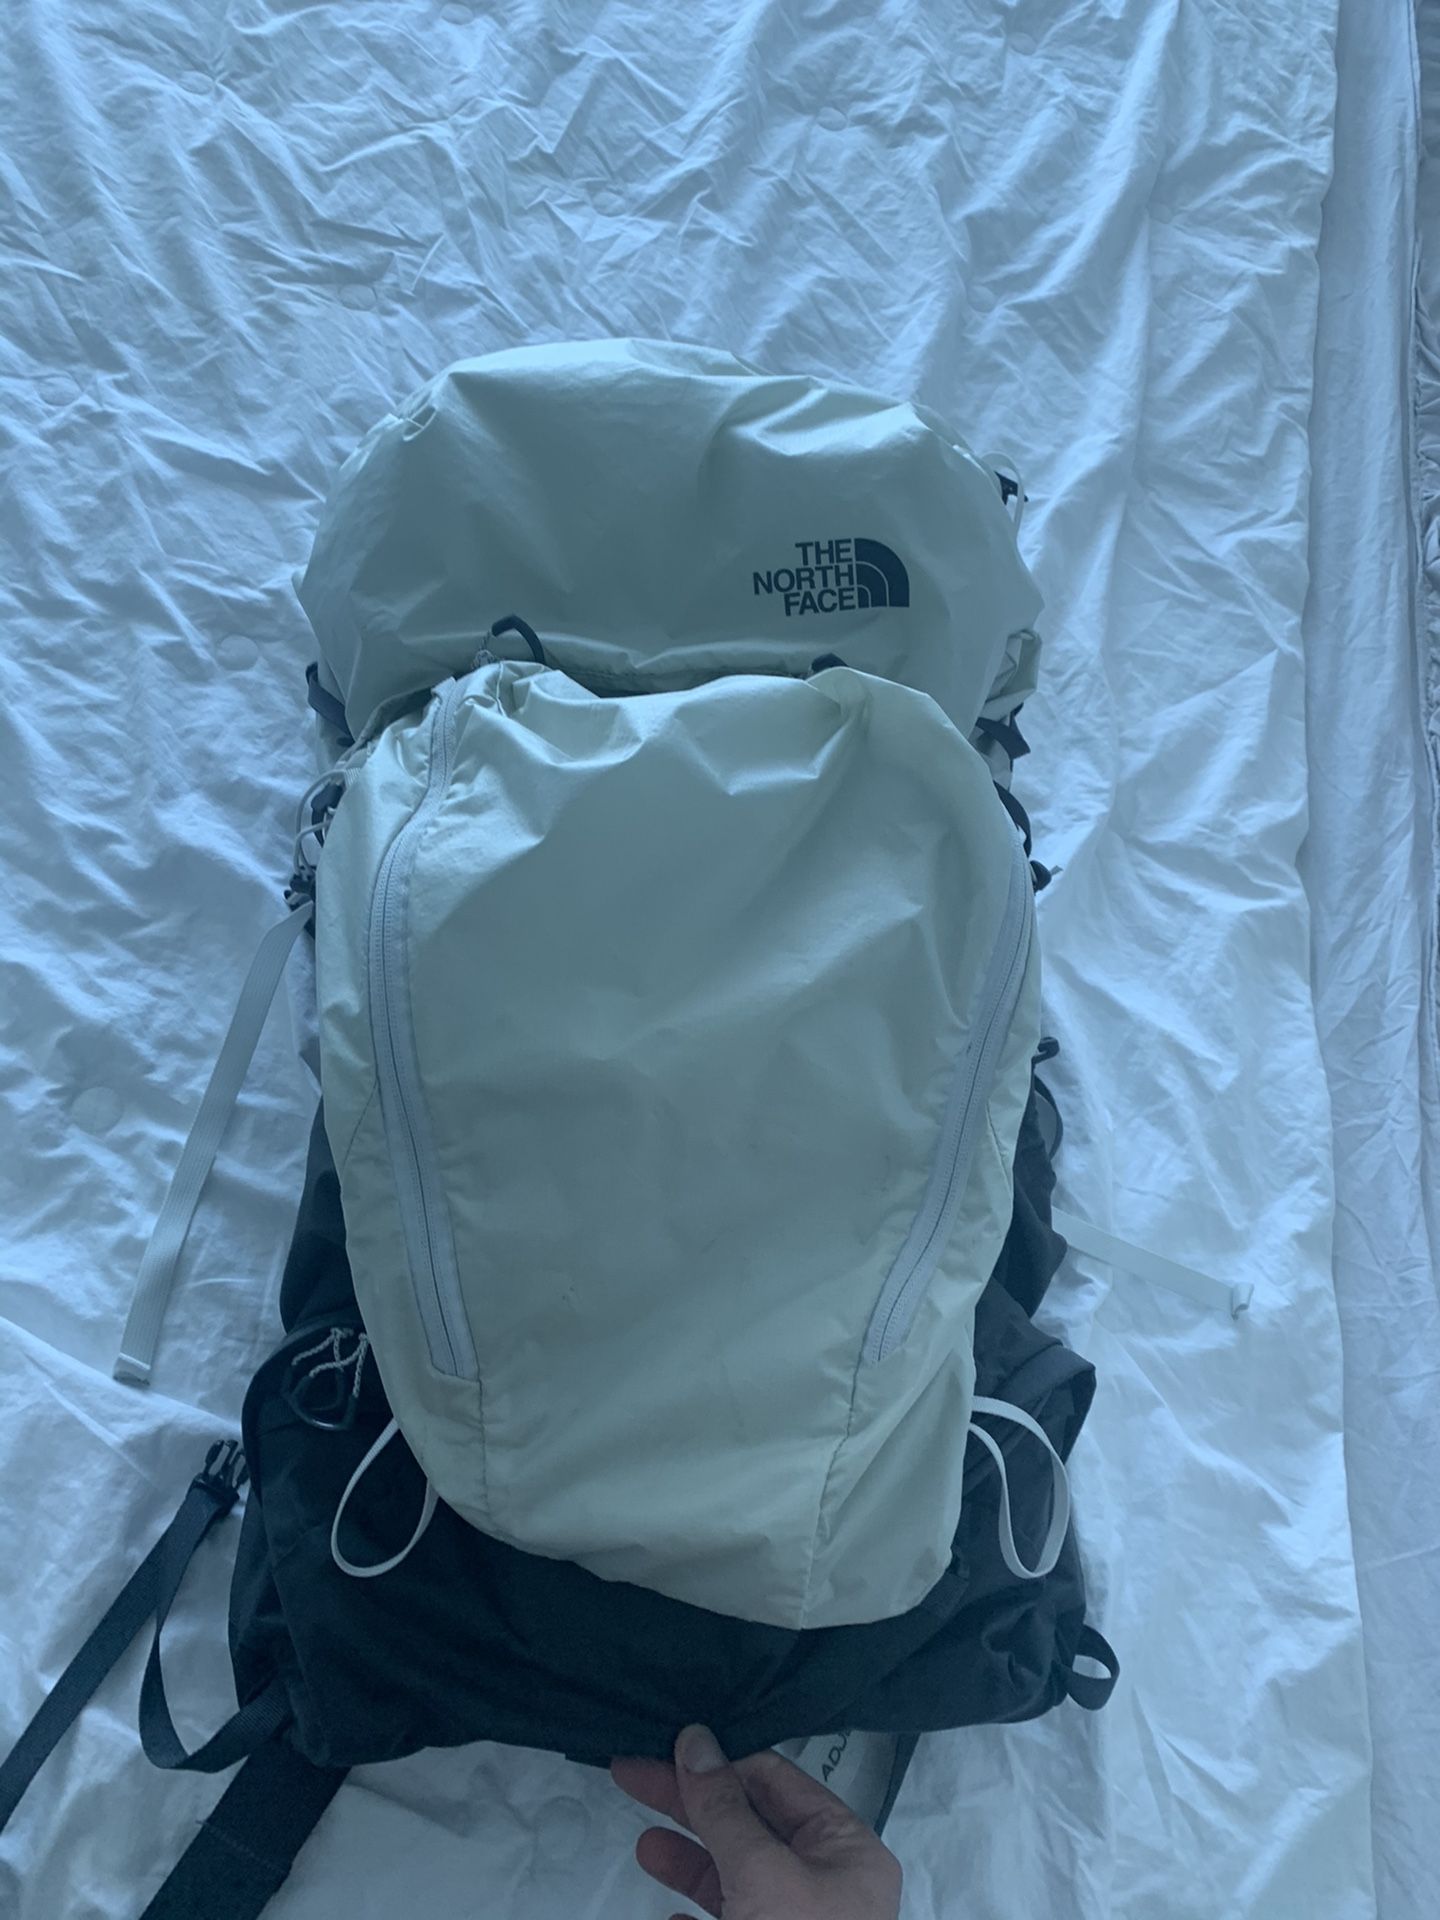 North face hiking backpack